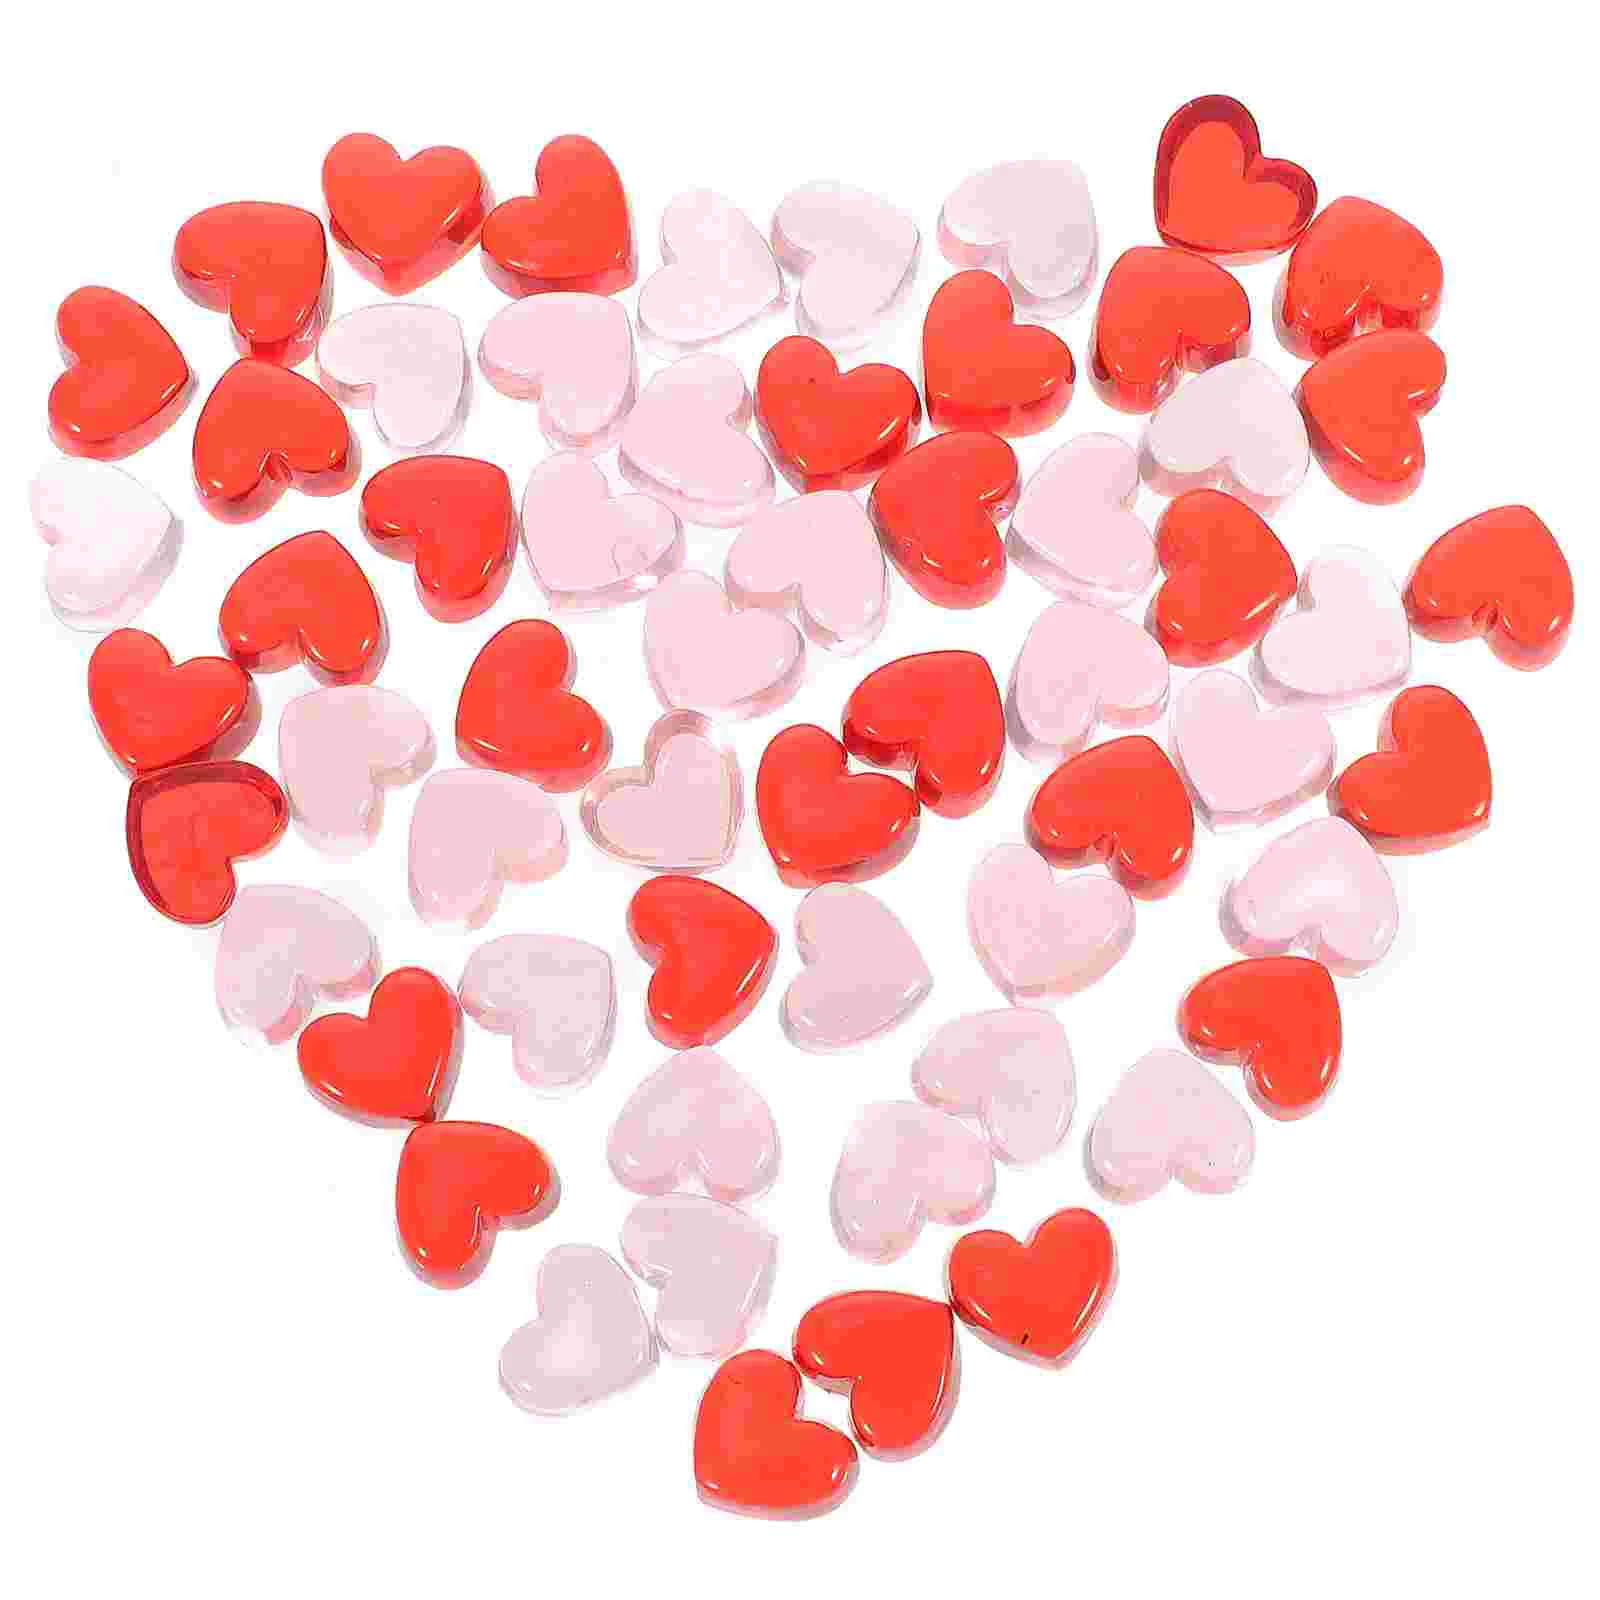 

Heart Table Scatter Vase Beads Acrylic Filler Shaped Valentine Party Resin Love Hearts Wedding Embellishments Crystals Day S